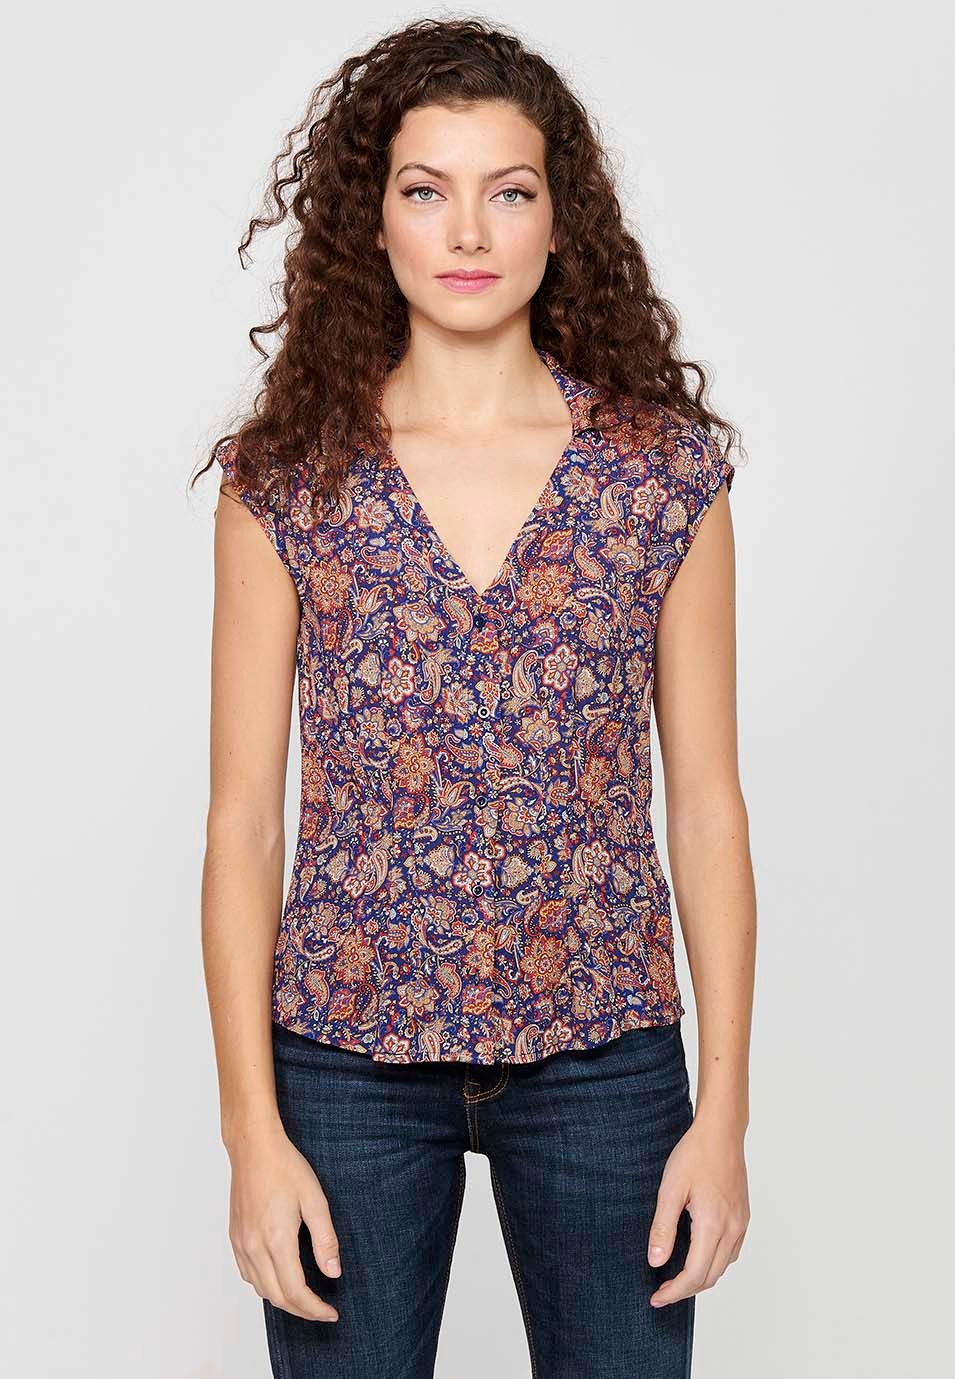 Sleeveless Blouse with Shirt Style and Button Front Closure and Multicolor Floral Print for Women 4